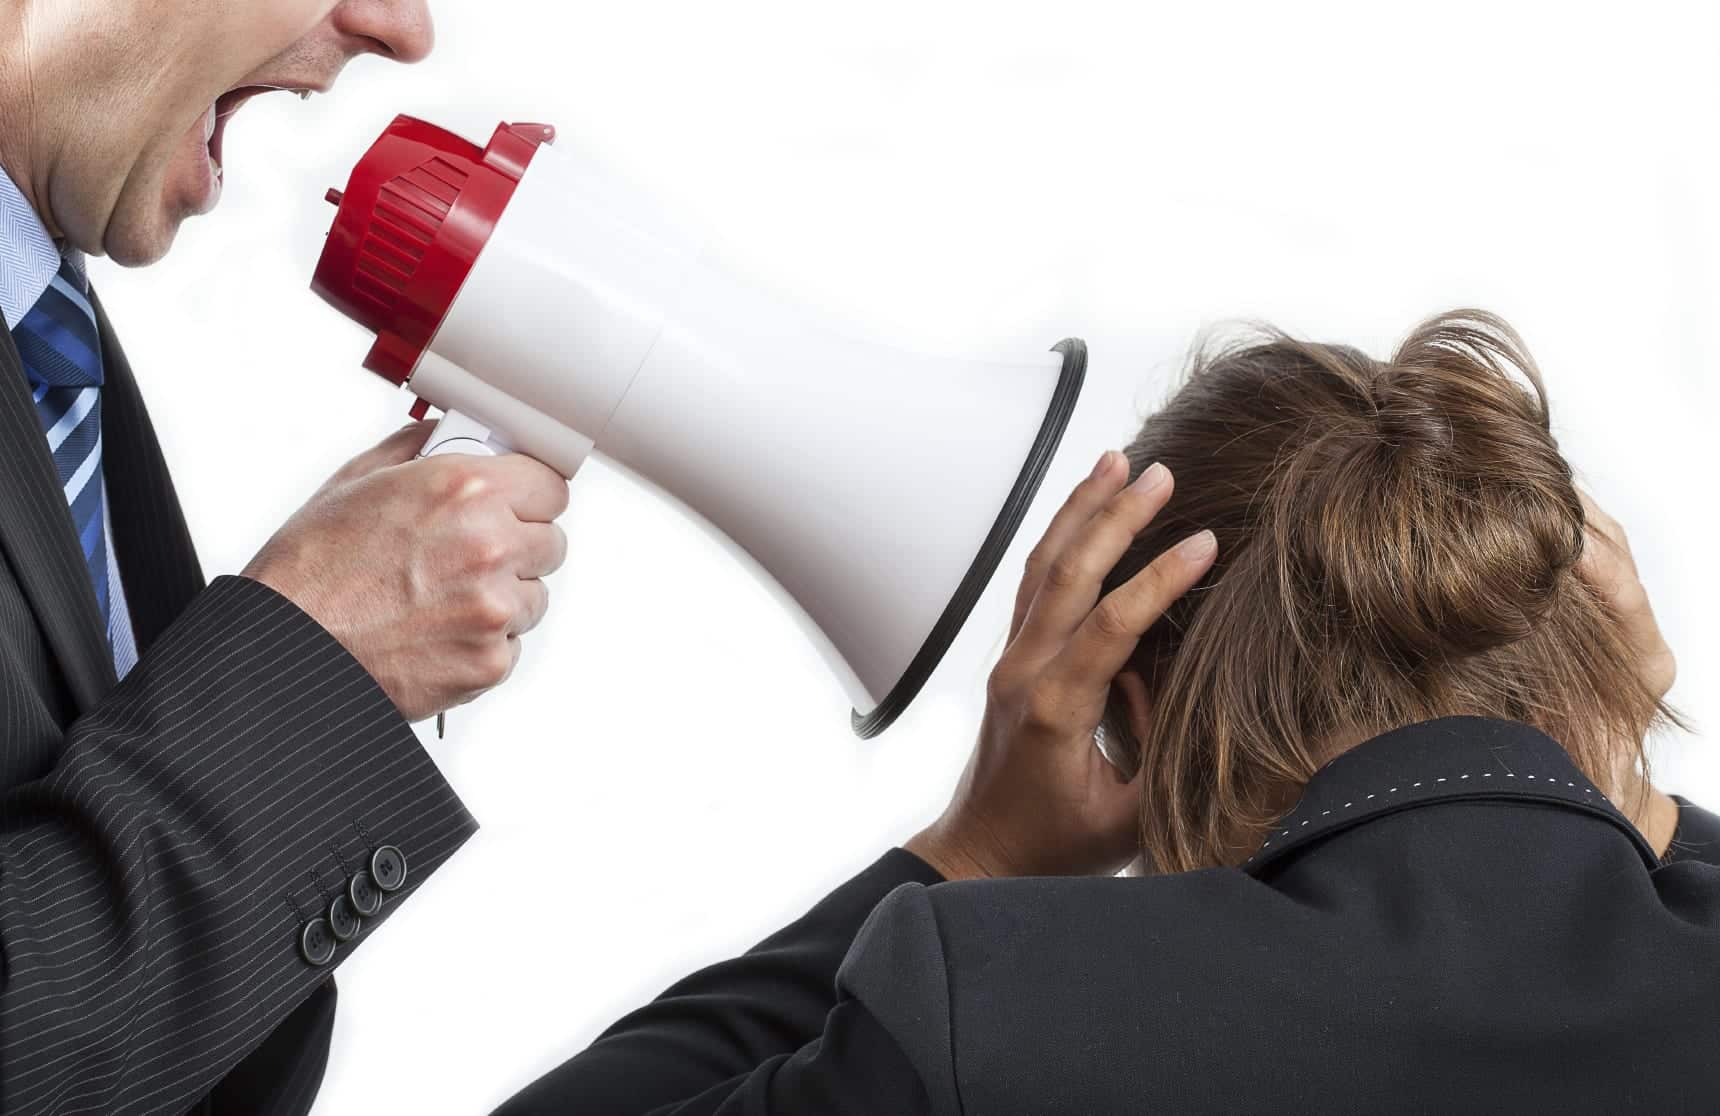 Actionable Tips for Stamping Out Workplace Bullying